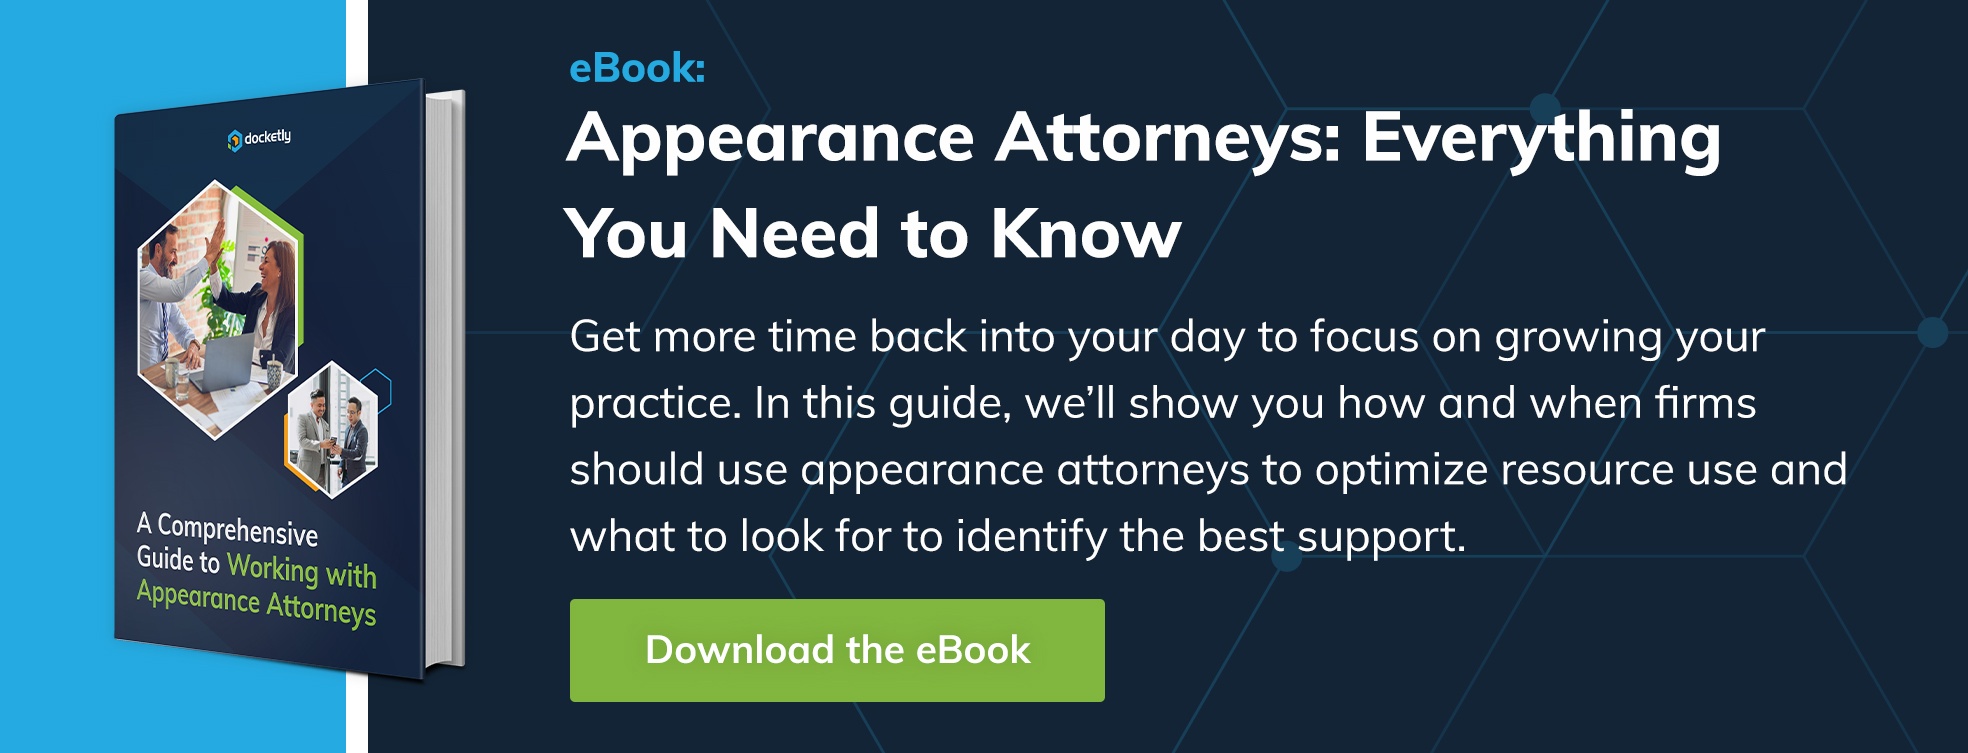 Appearance Attorneys: Everything You Need to Know